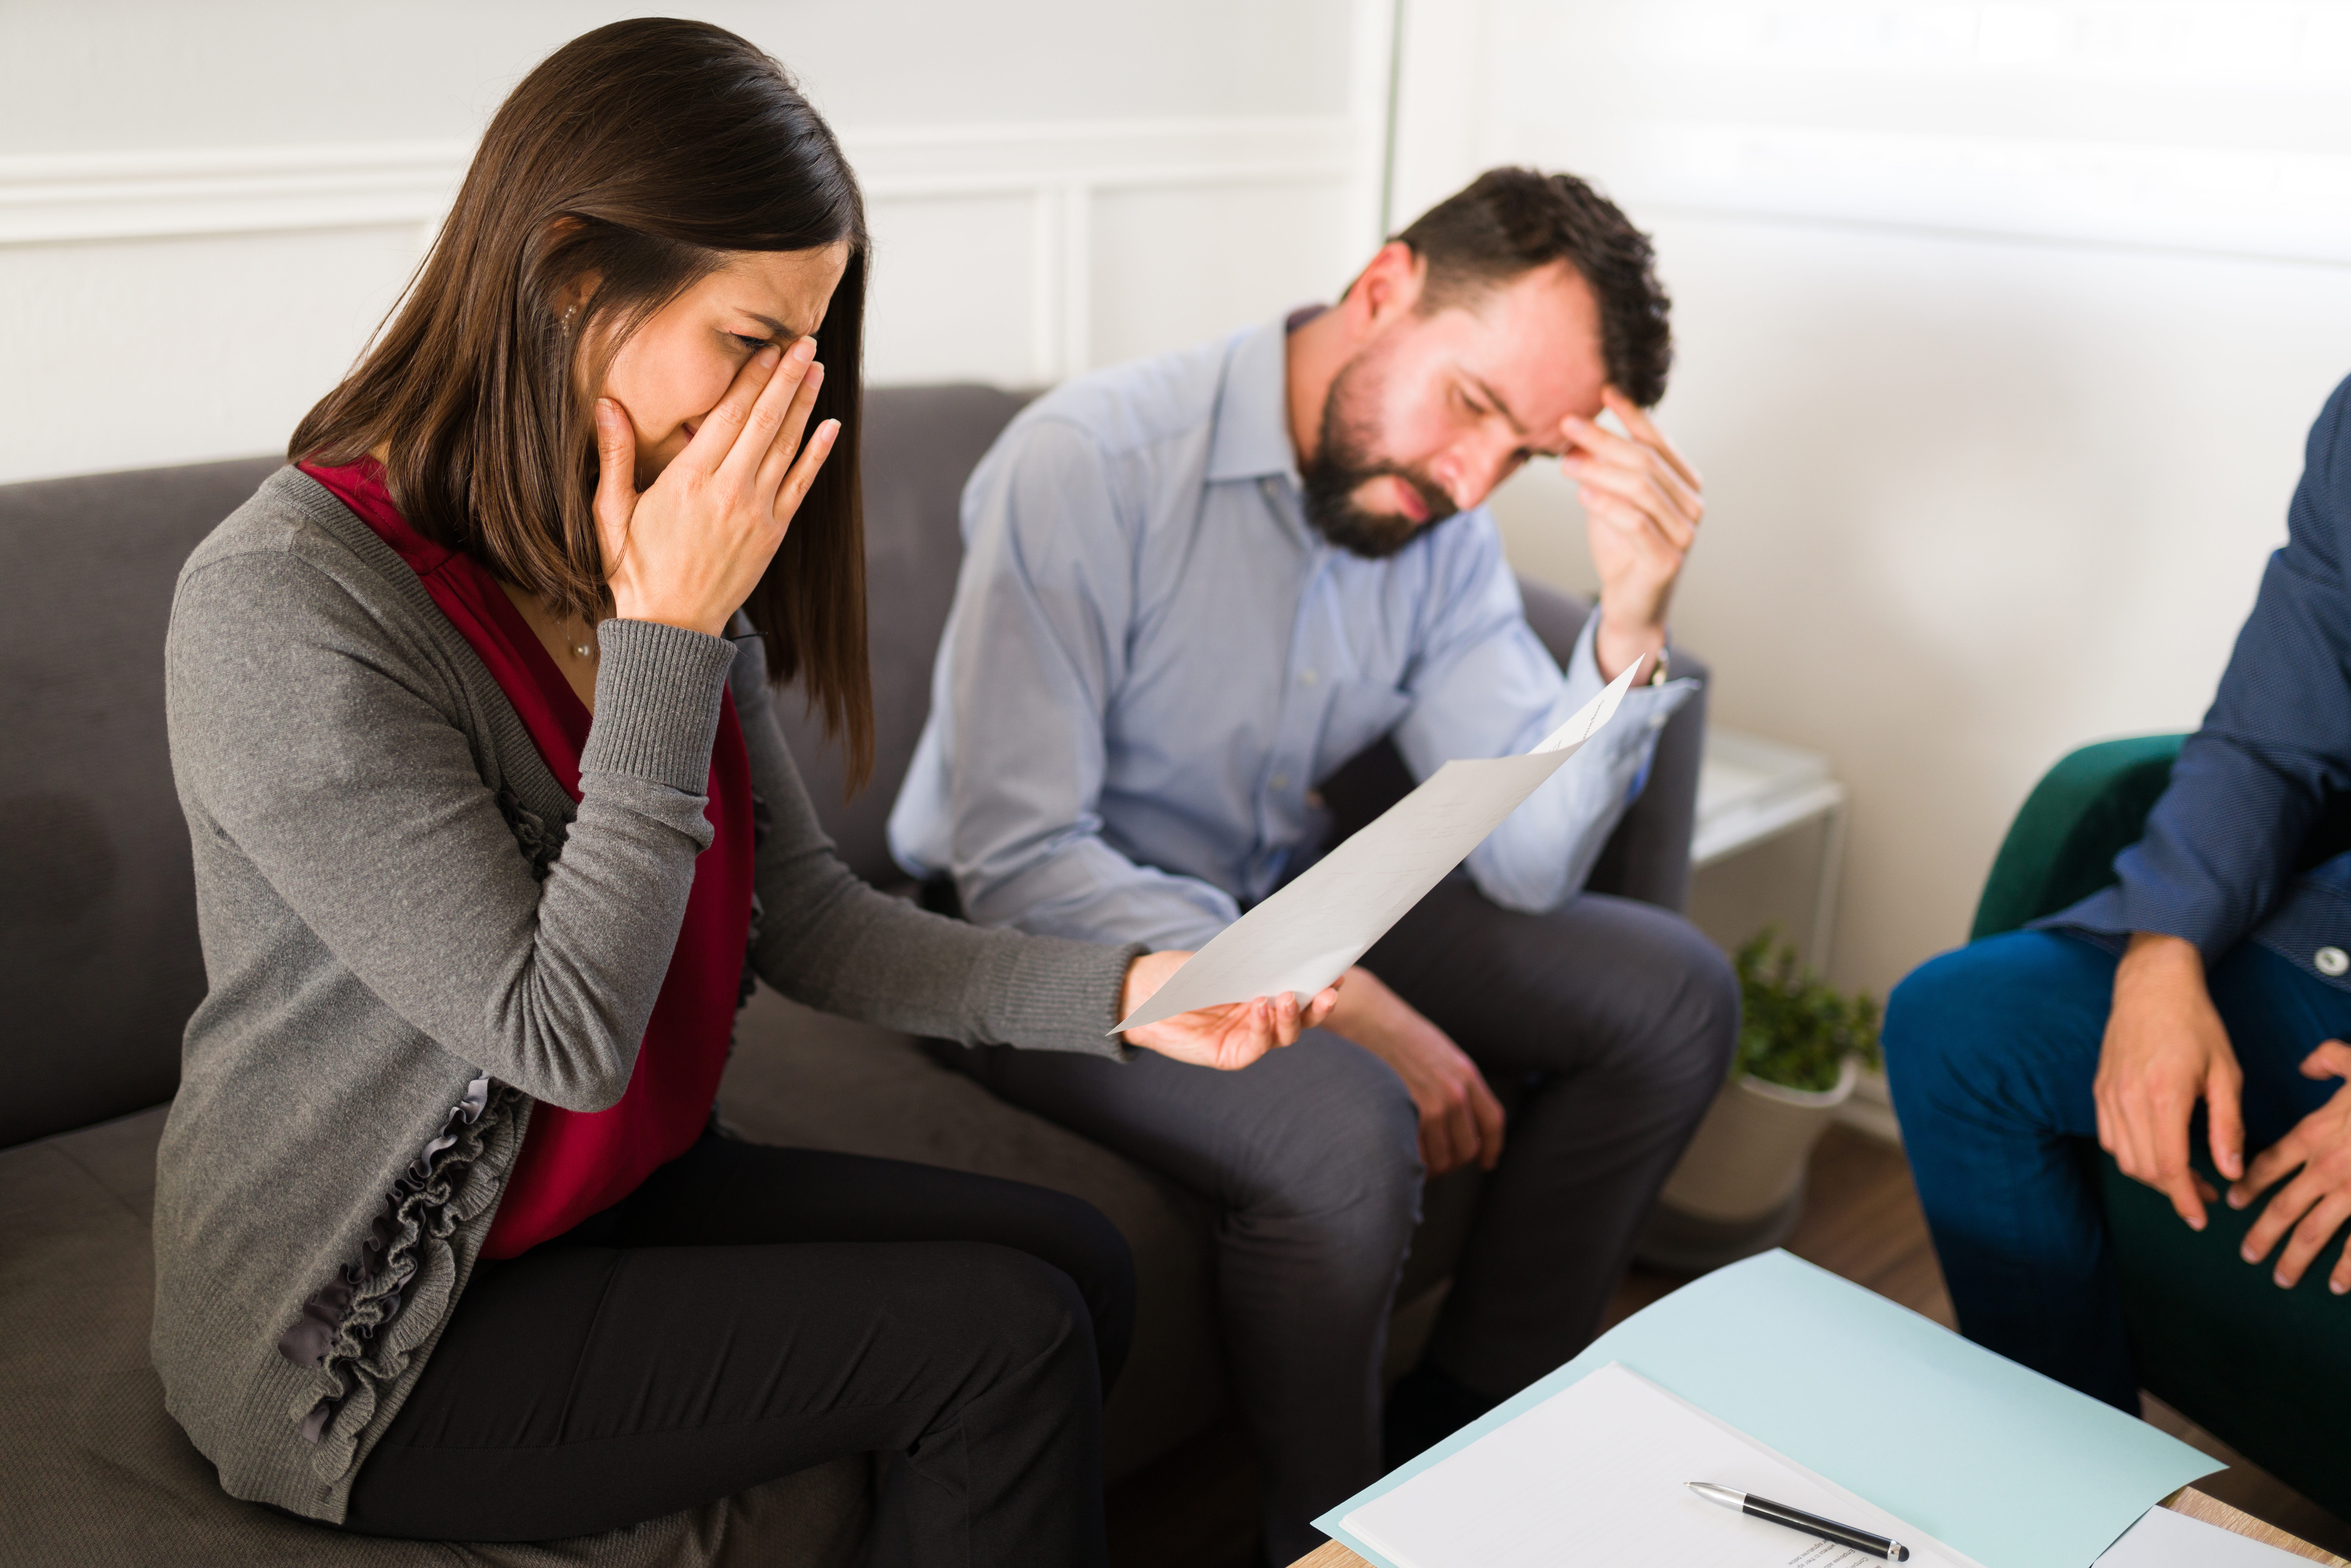 A woman crying while holding a piece of paper in her hand with a man sitting beside her | Source: Shutterstock